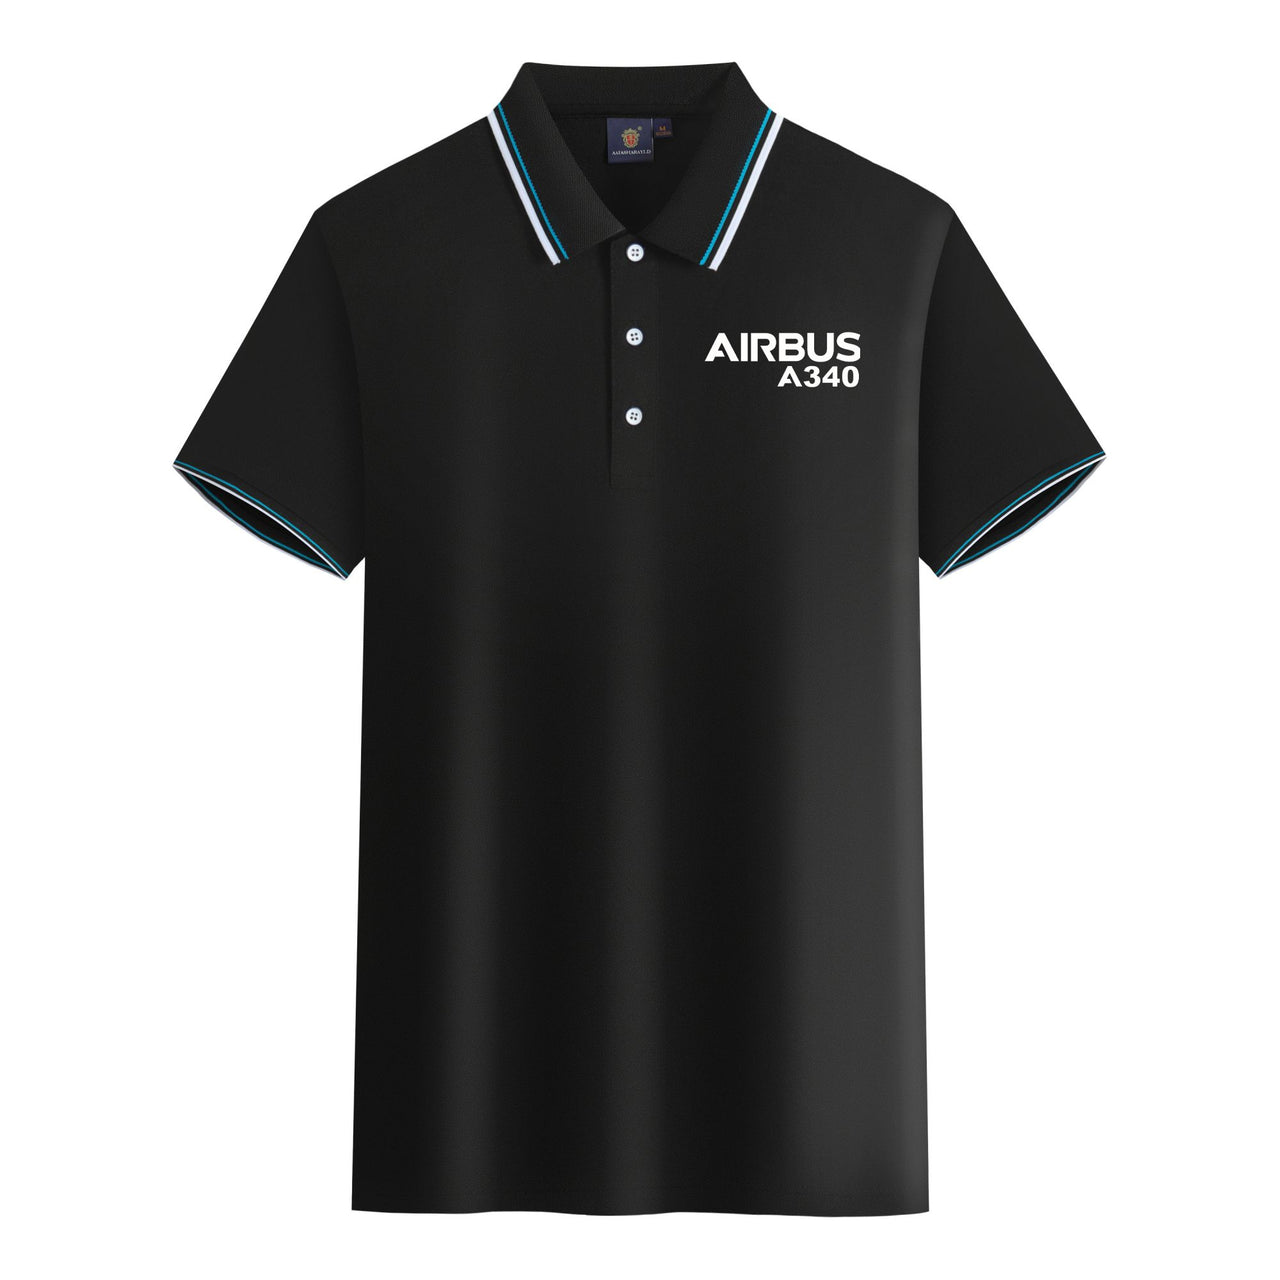 Airbus A340 & Text Designed Stylish Polo T-Shirts